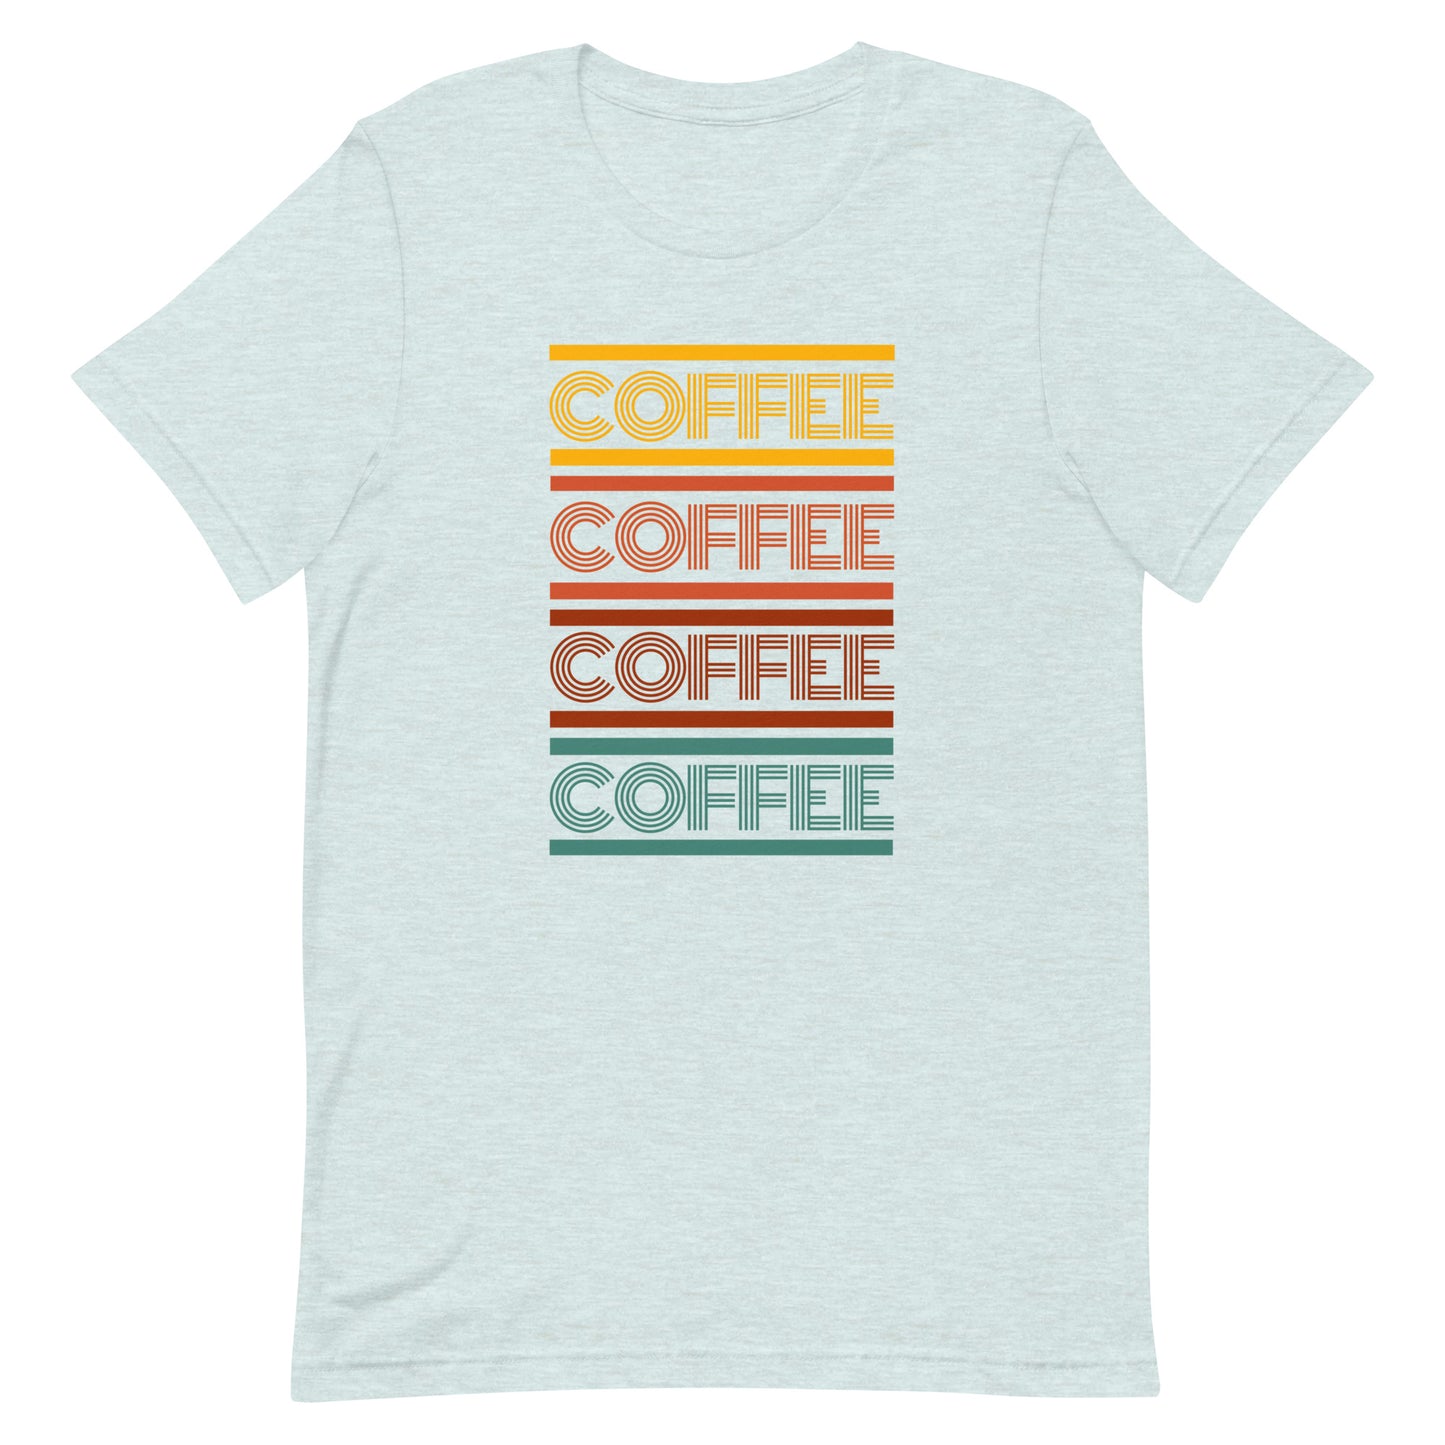 A heather prism ice blue coffee t-shirt that has the words coffee repeated in a retro inspired font.